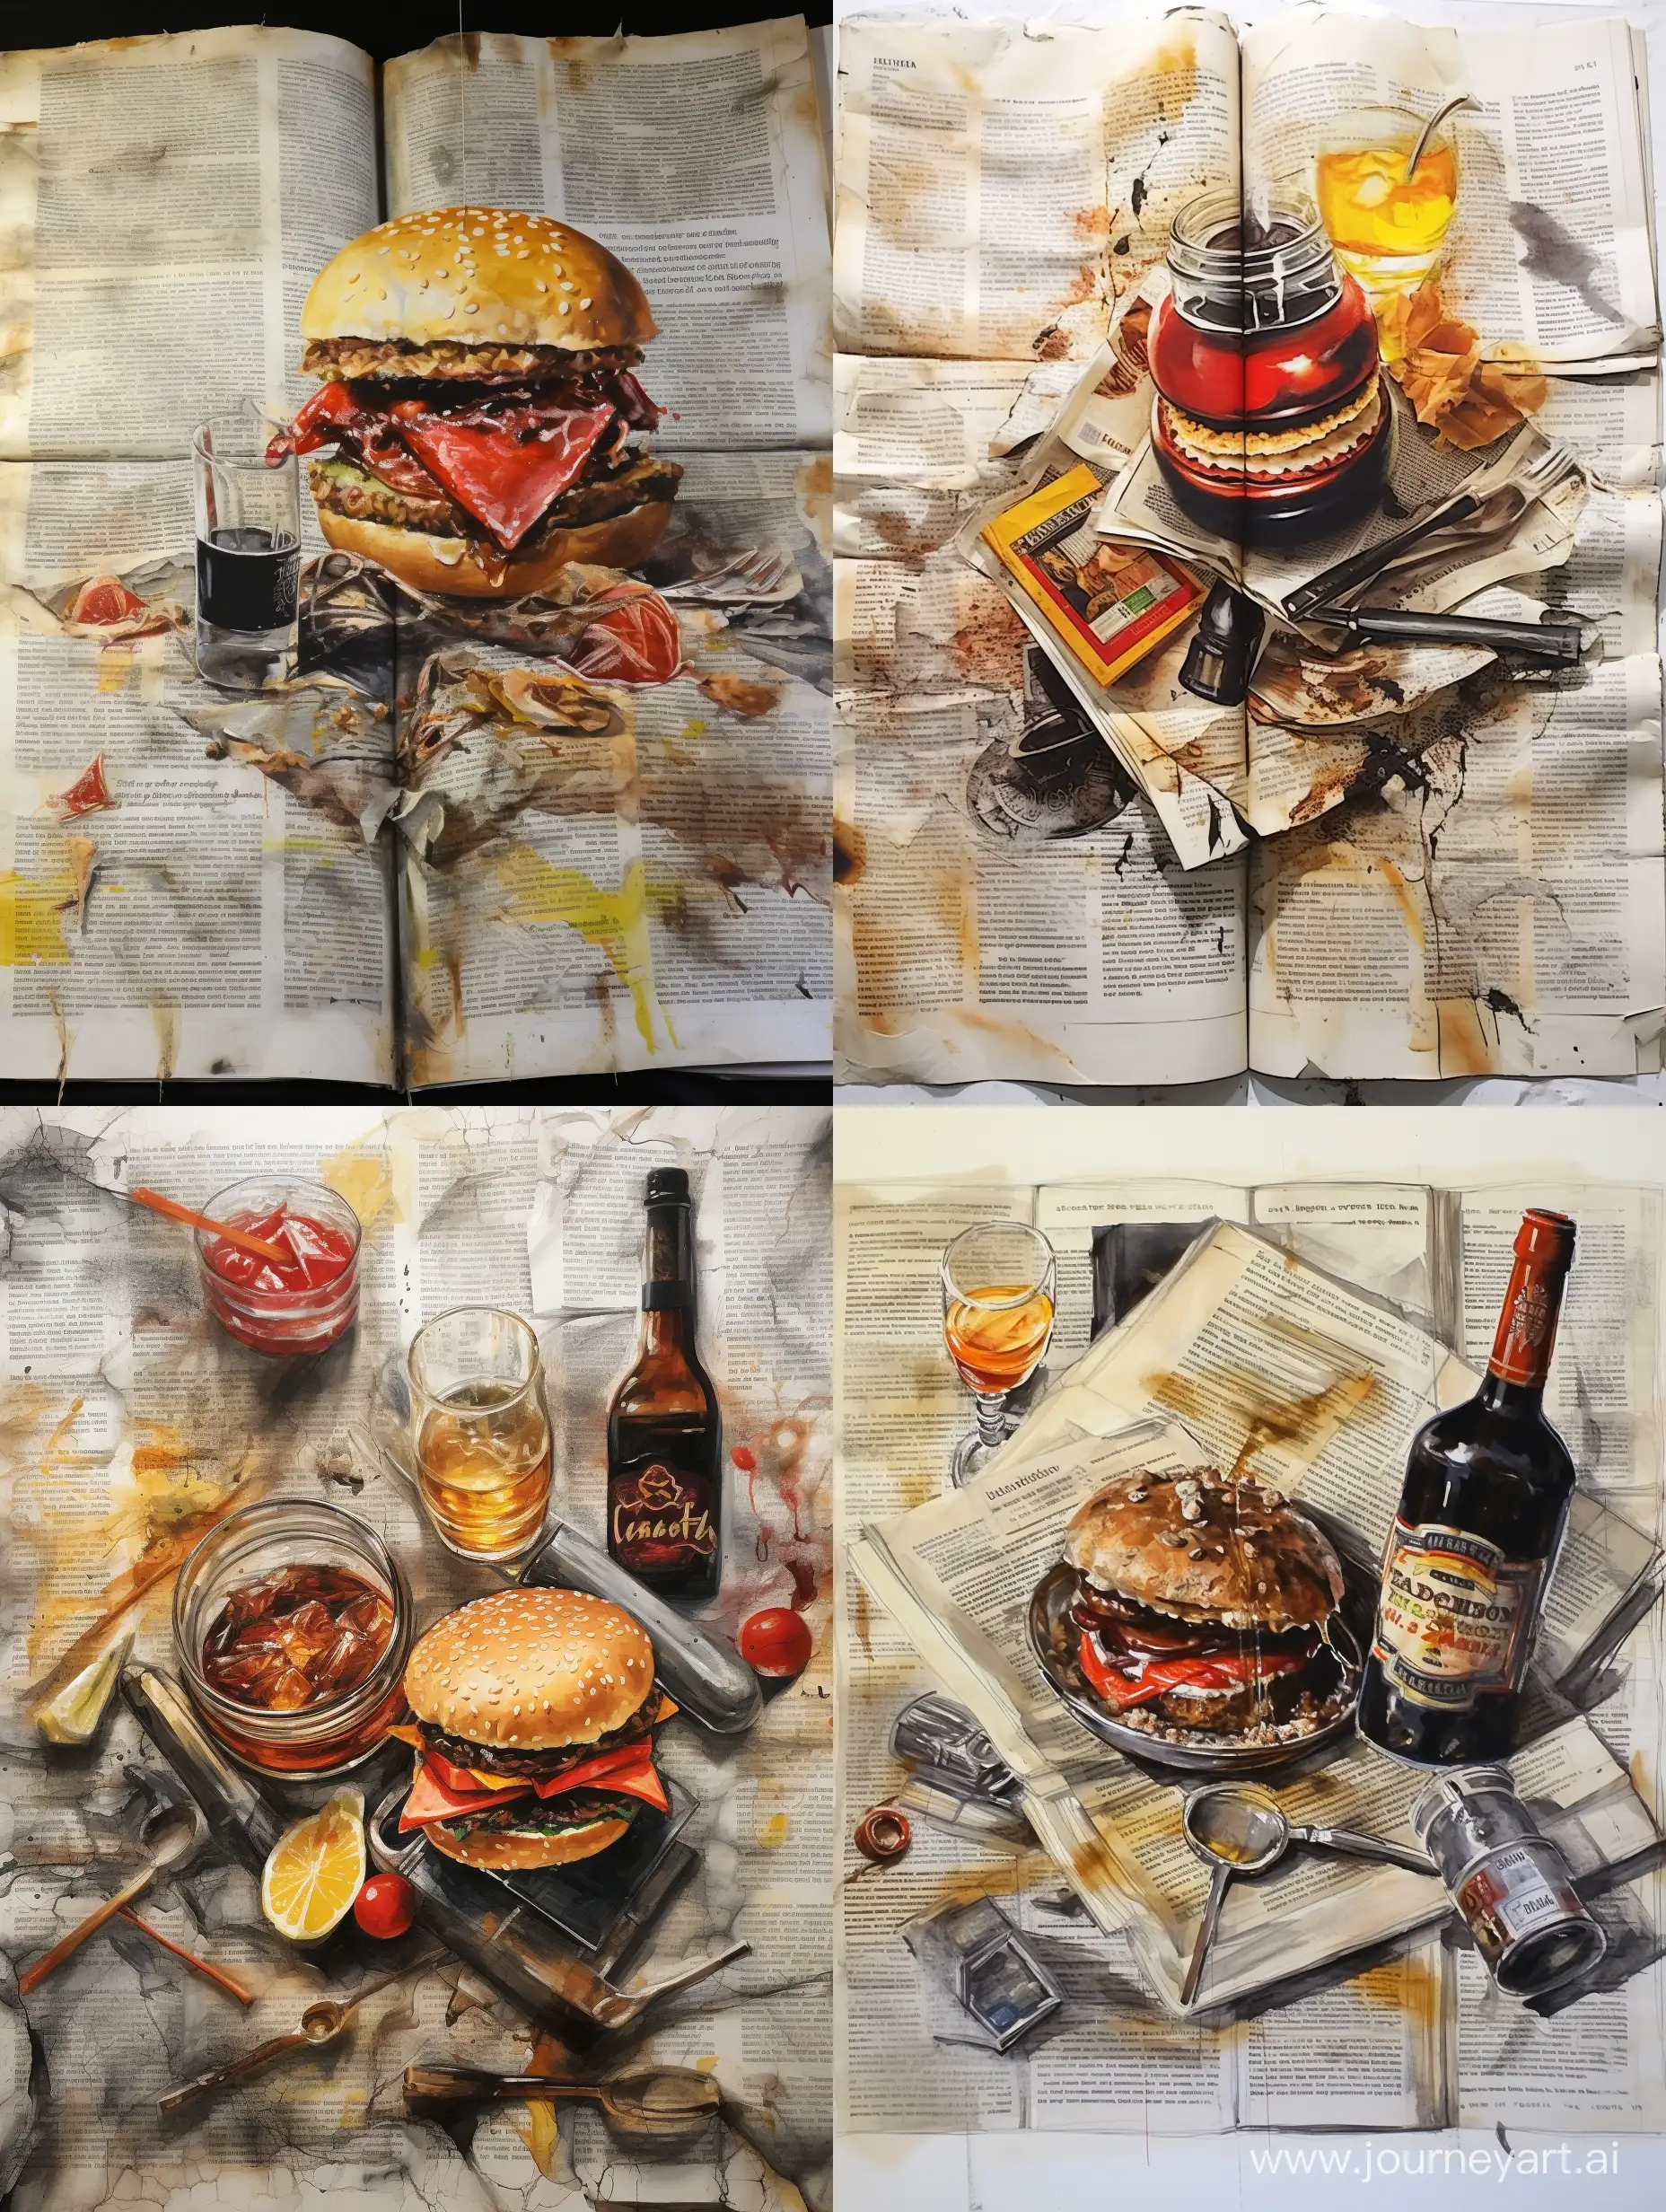 Savoring-a-Literary-Feast-Whiskey-Burgers-and-Steadmans-Art